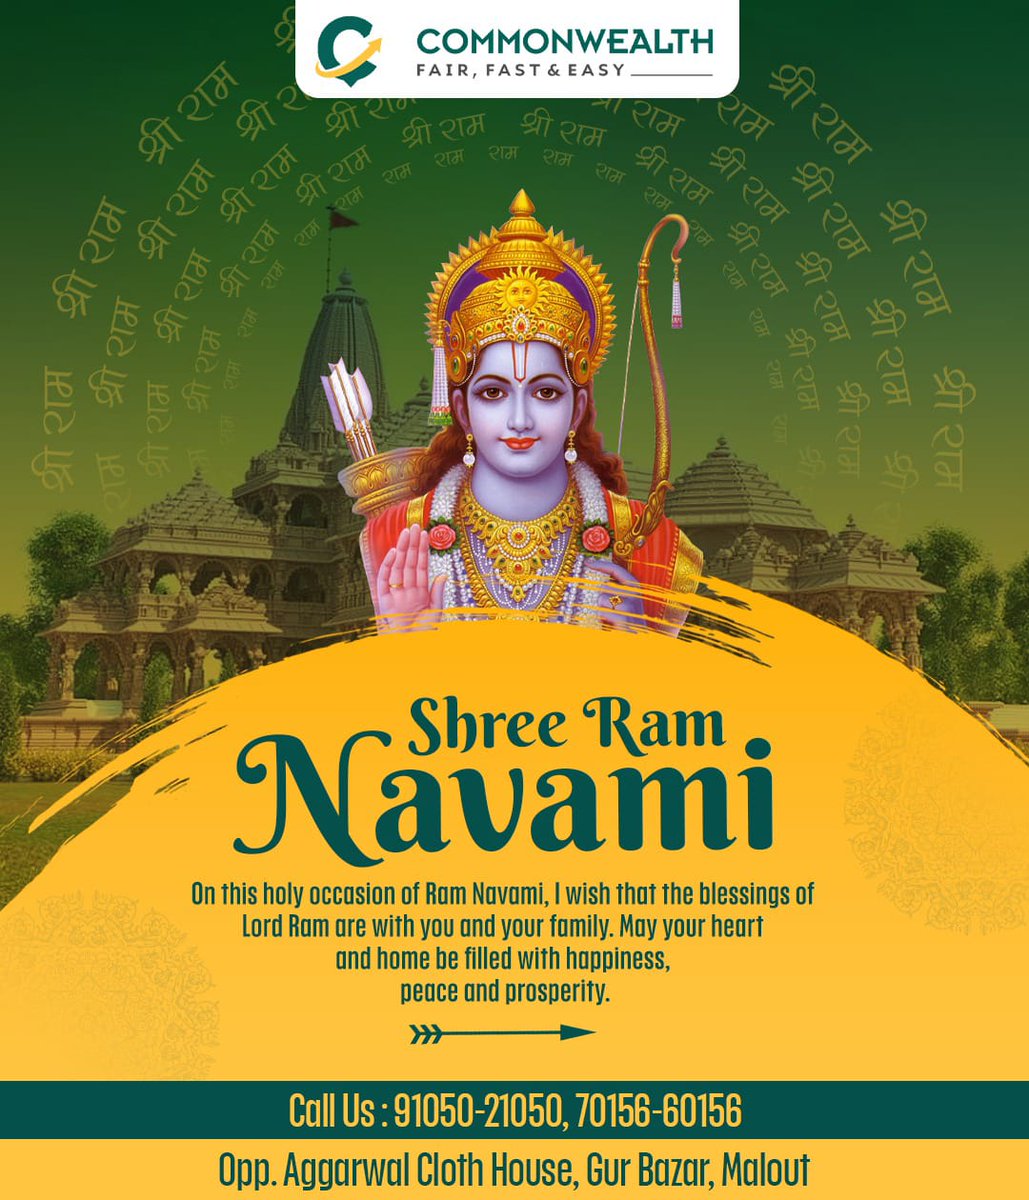 May the blessings of Lord Ram fill your life with happiness, prosperity, and immense success. 

Commonwealth Education | Malout

#canada #canadajobs #canadaimmigration #ielts #VISA #visaservices #ieltswriting #ieltspreparation #studyinuk #visa #ieltsspeaking #ieltsexam #